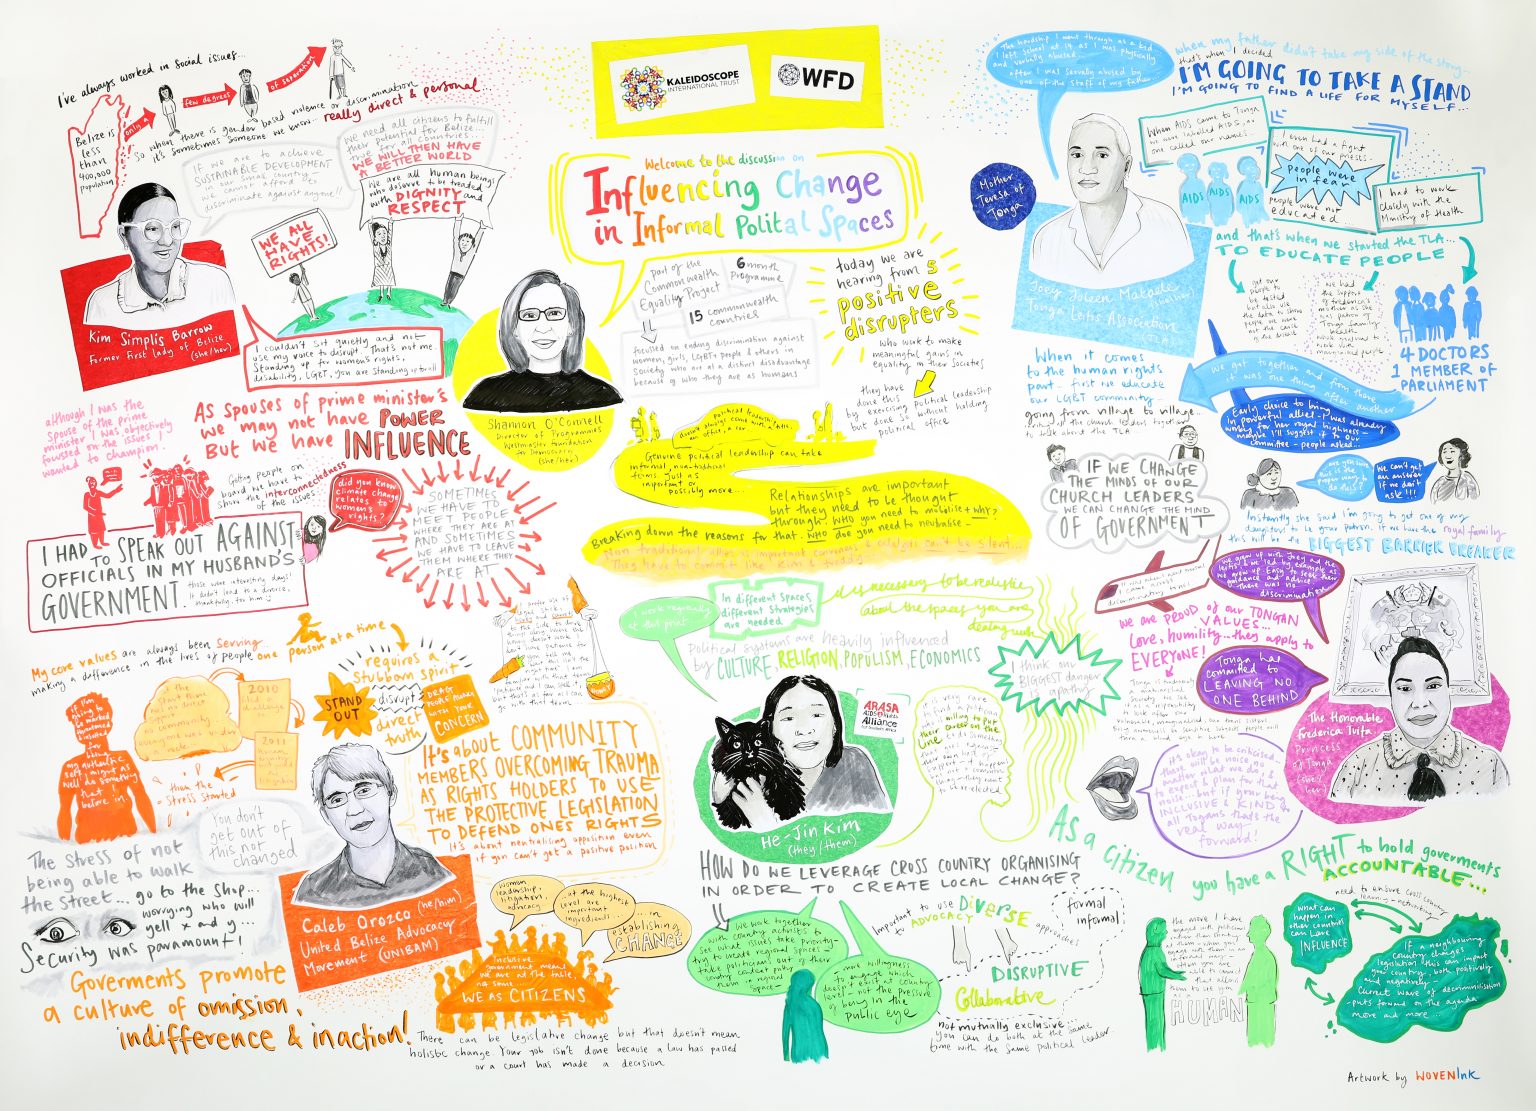 Visual minutes of the influencing change event